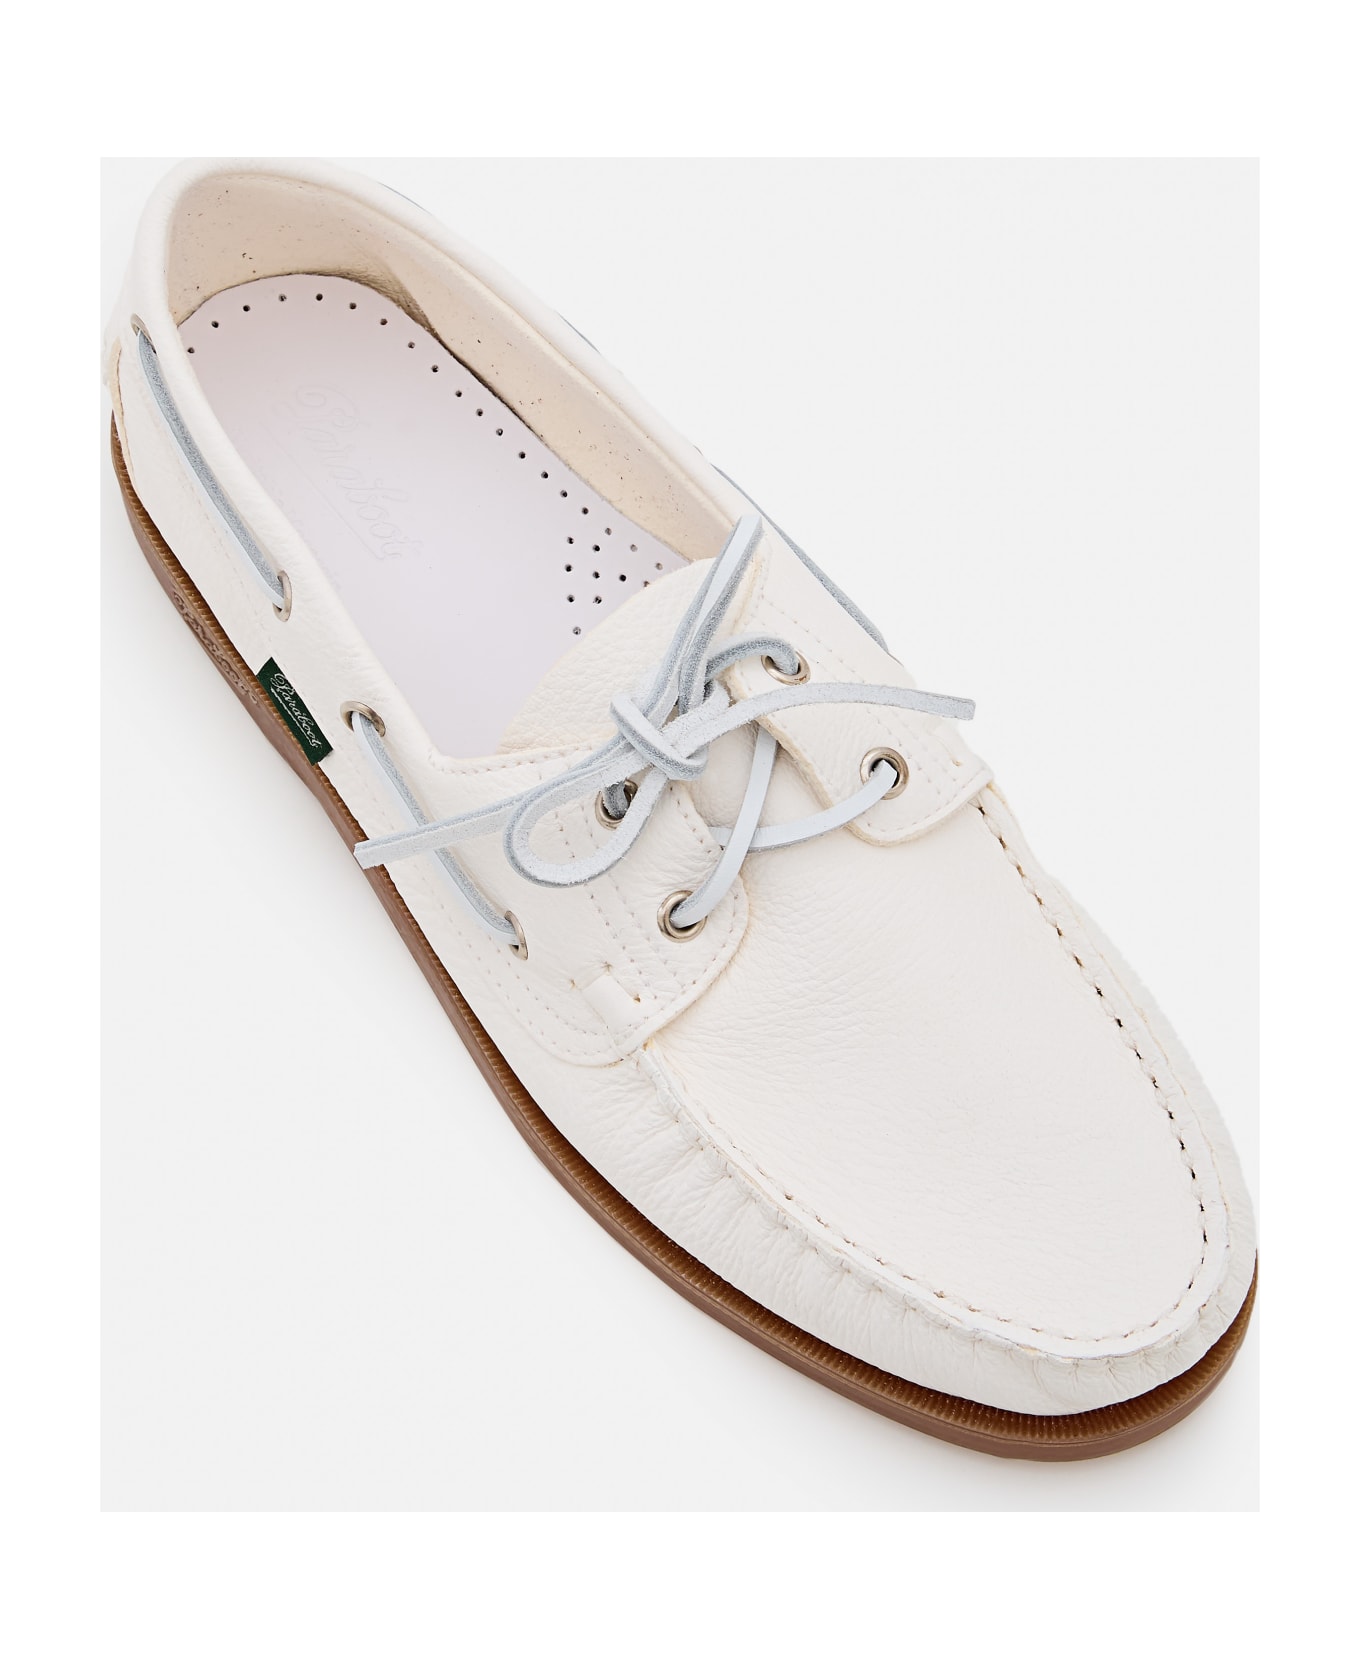 Paraboot Barth/marine Miel-cerf Blanc Loafers - White